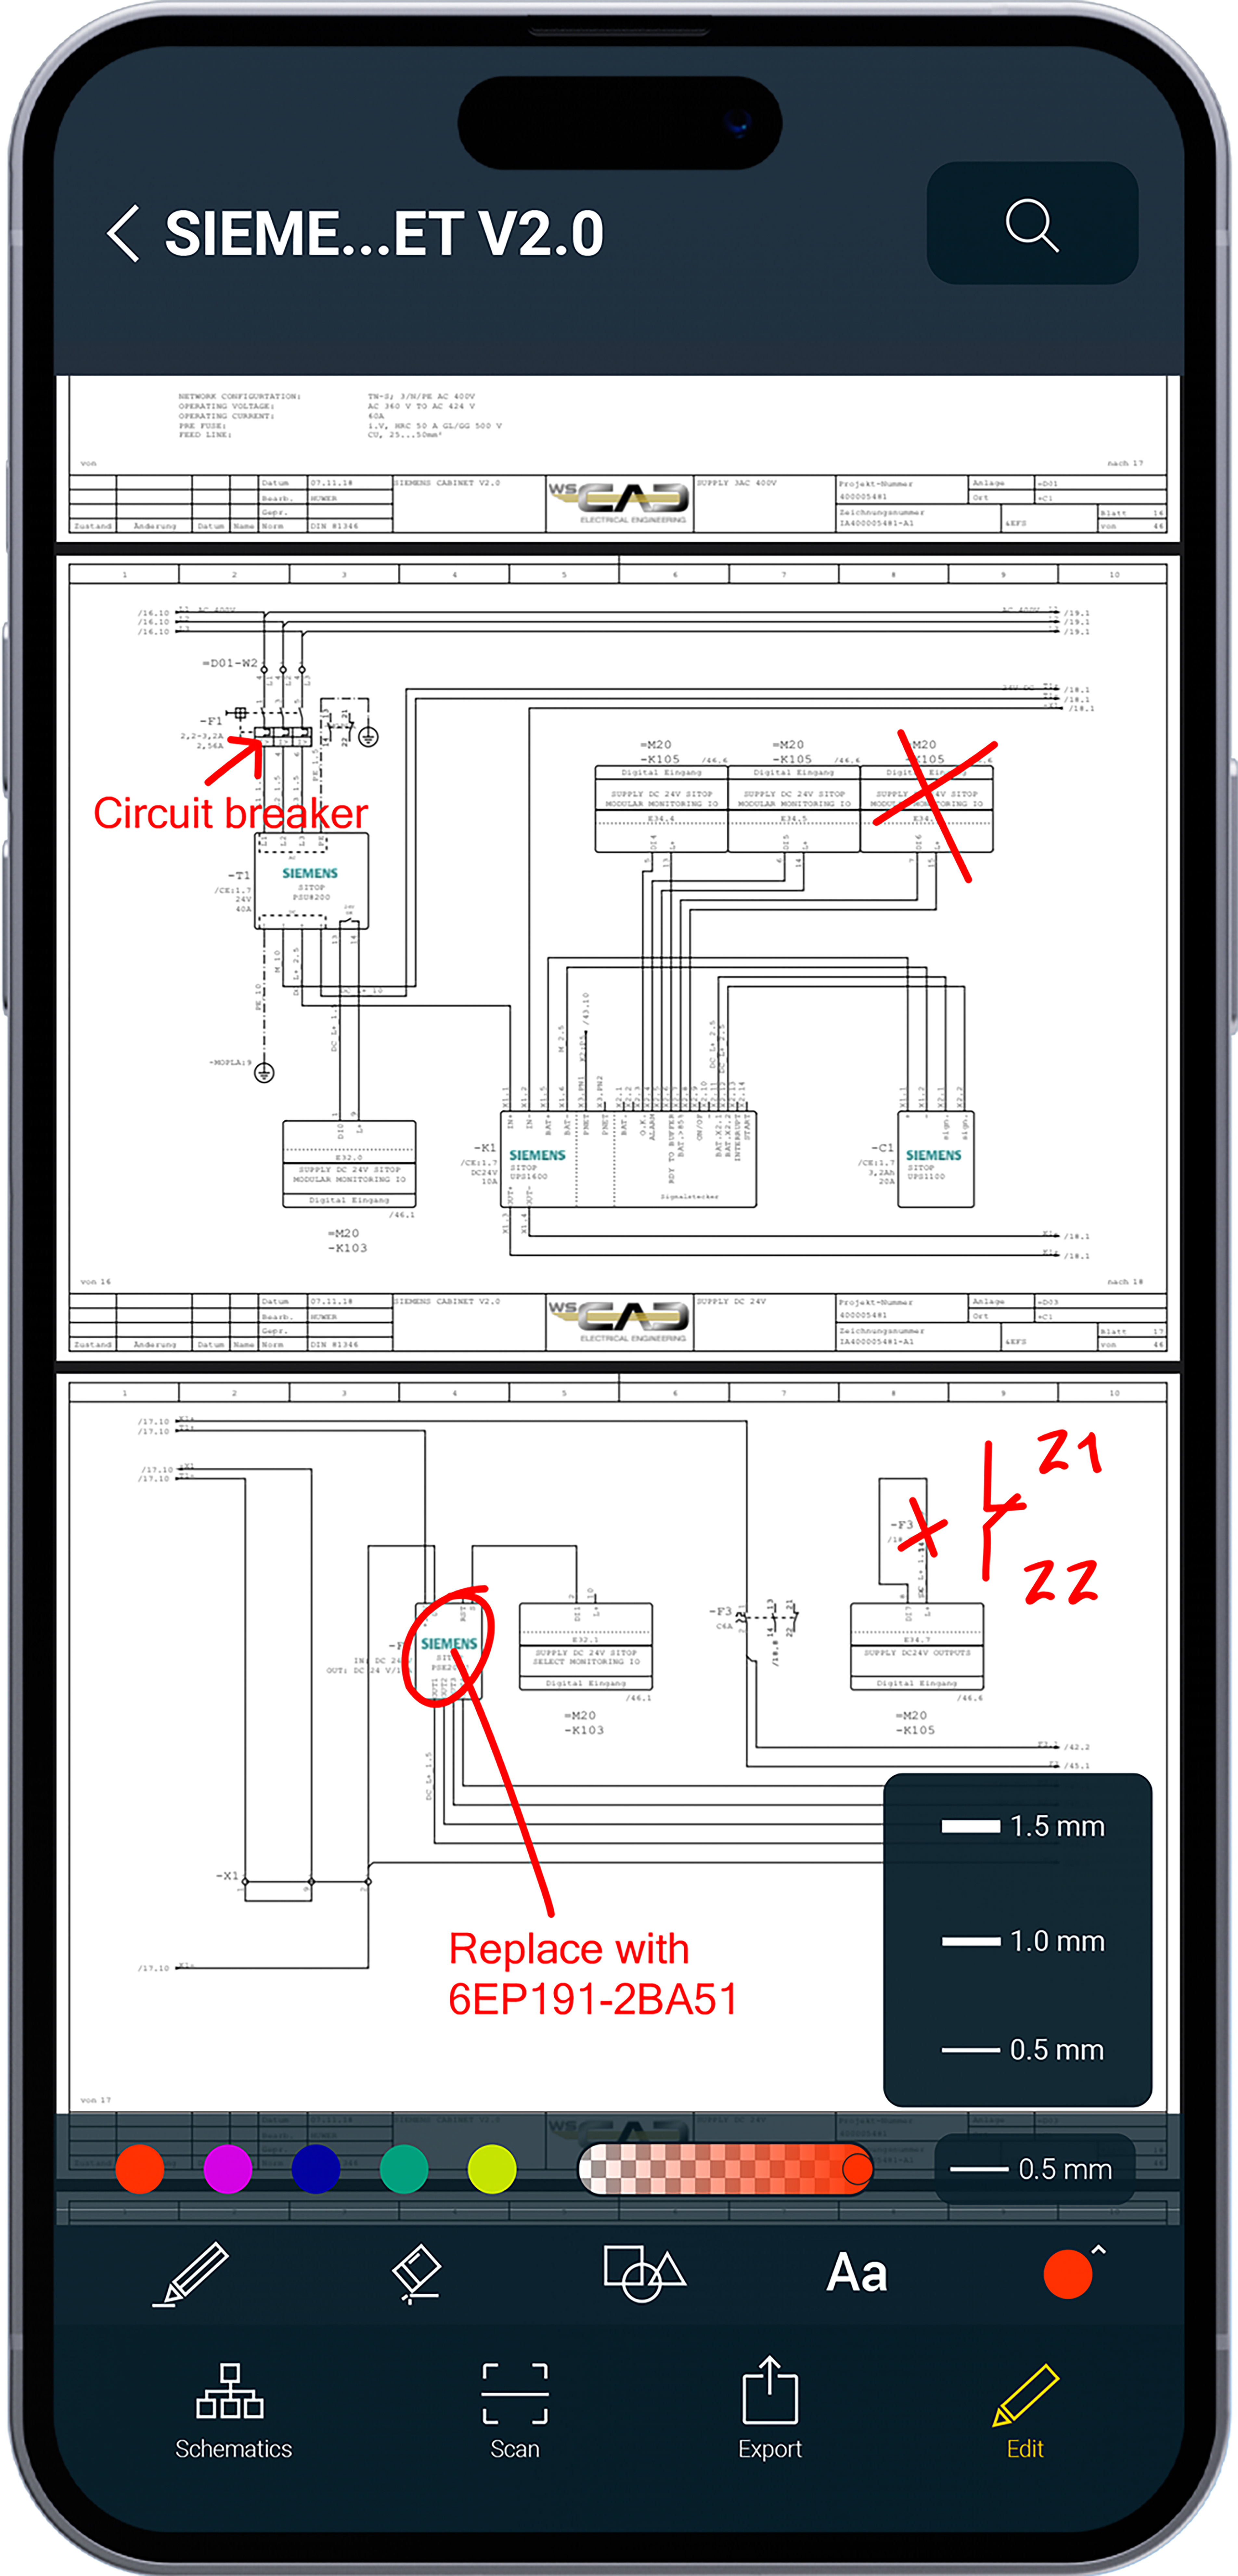 With the new Redlining feature in WSCAD's Cabinet AR App, service technicians and maintainers can document changes directly on-site within the electrical documentation - ensuring up-to-date, understandable records available to everyone at any time.